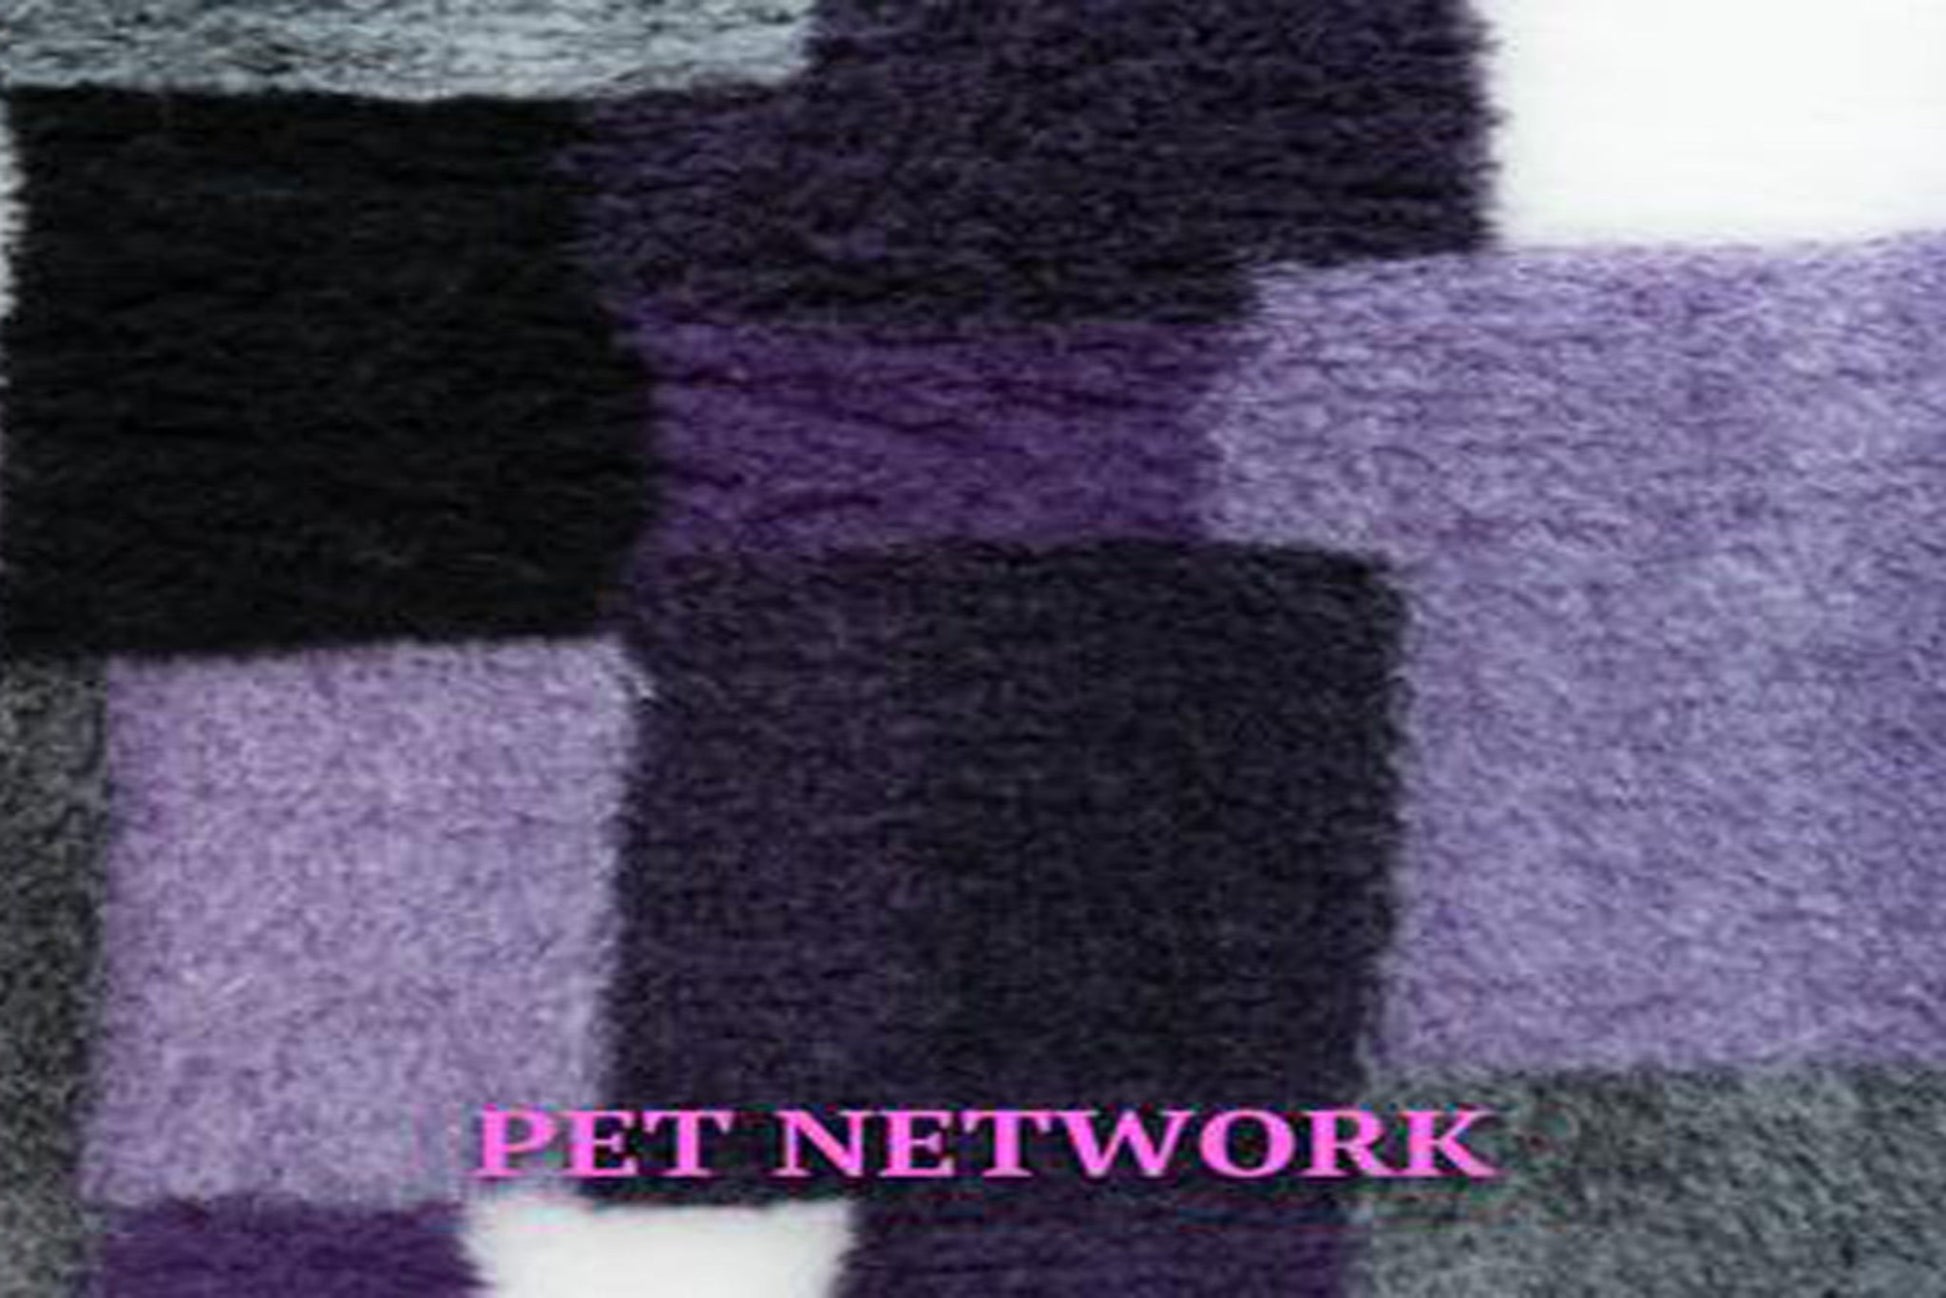 Vet Bed - Rubber Backed - Purple, White and Black Rectangles